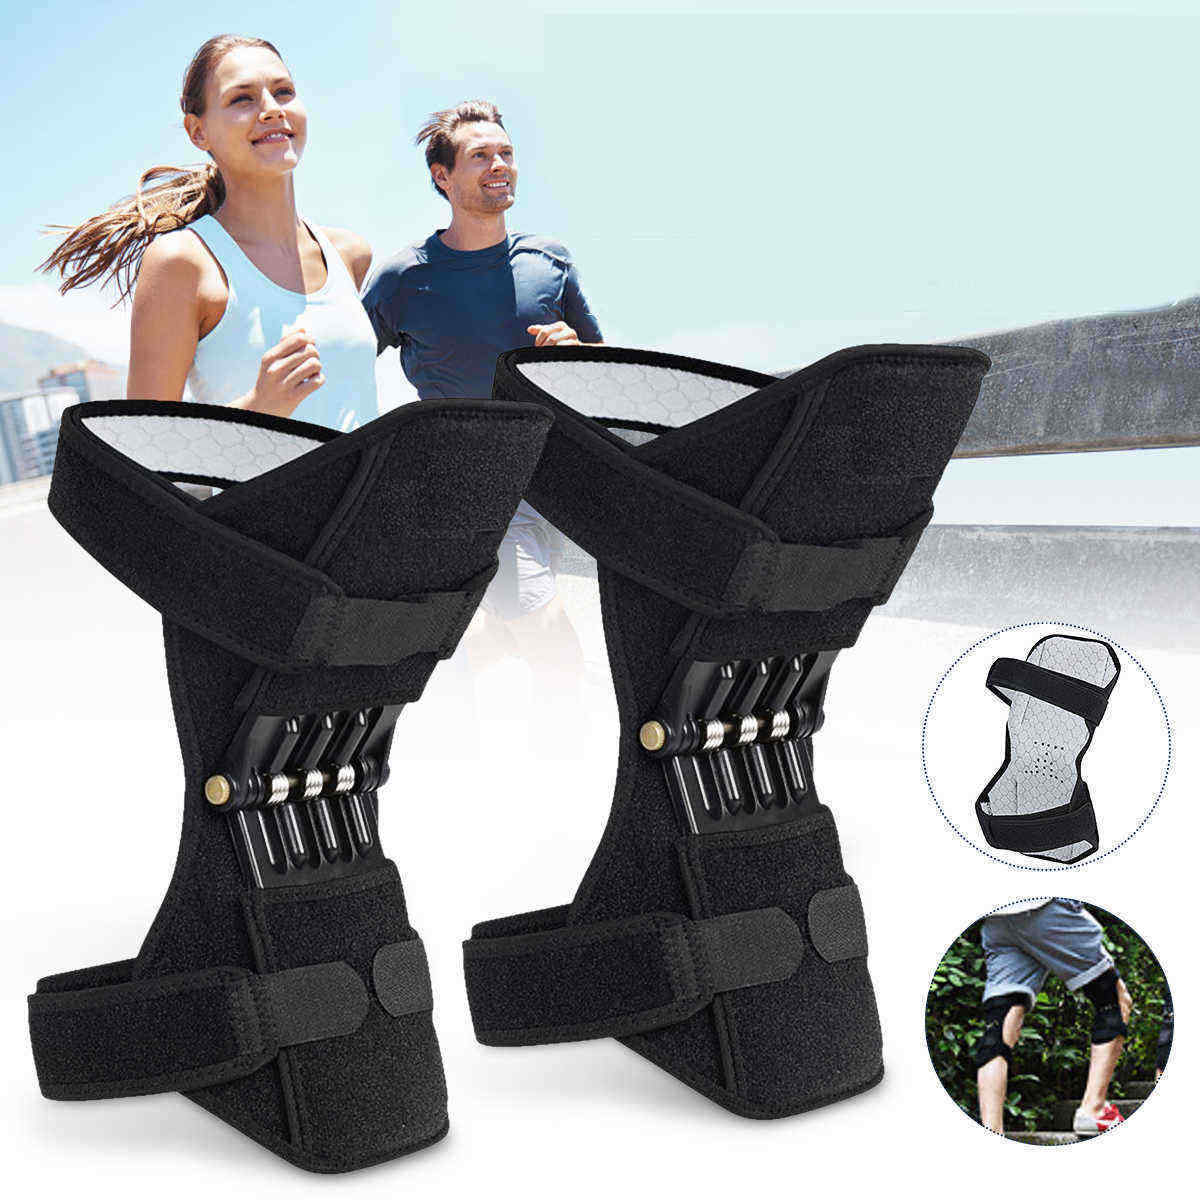 1-Pair-Kneepad-Knee-Protection-Booster-Old-Cold-Leg-Mountaineering-Squat-Protector-Knee-Pad-Booster-1558067